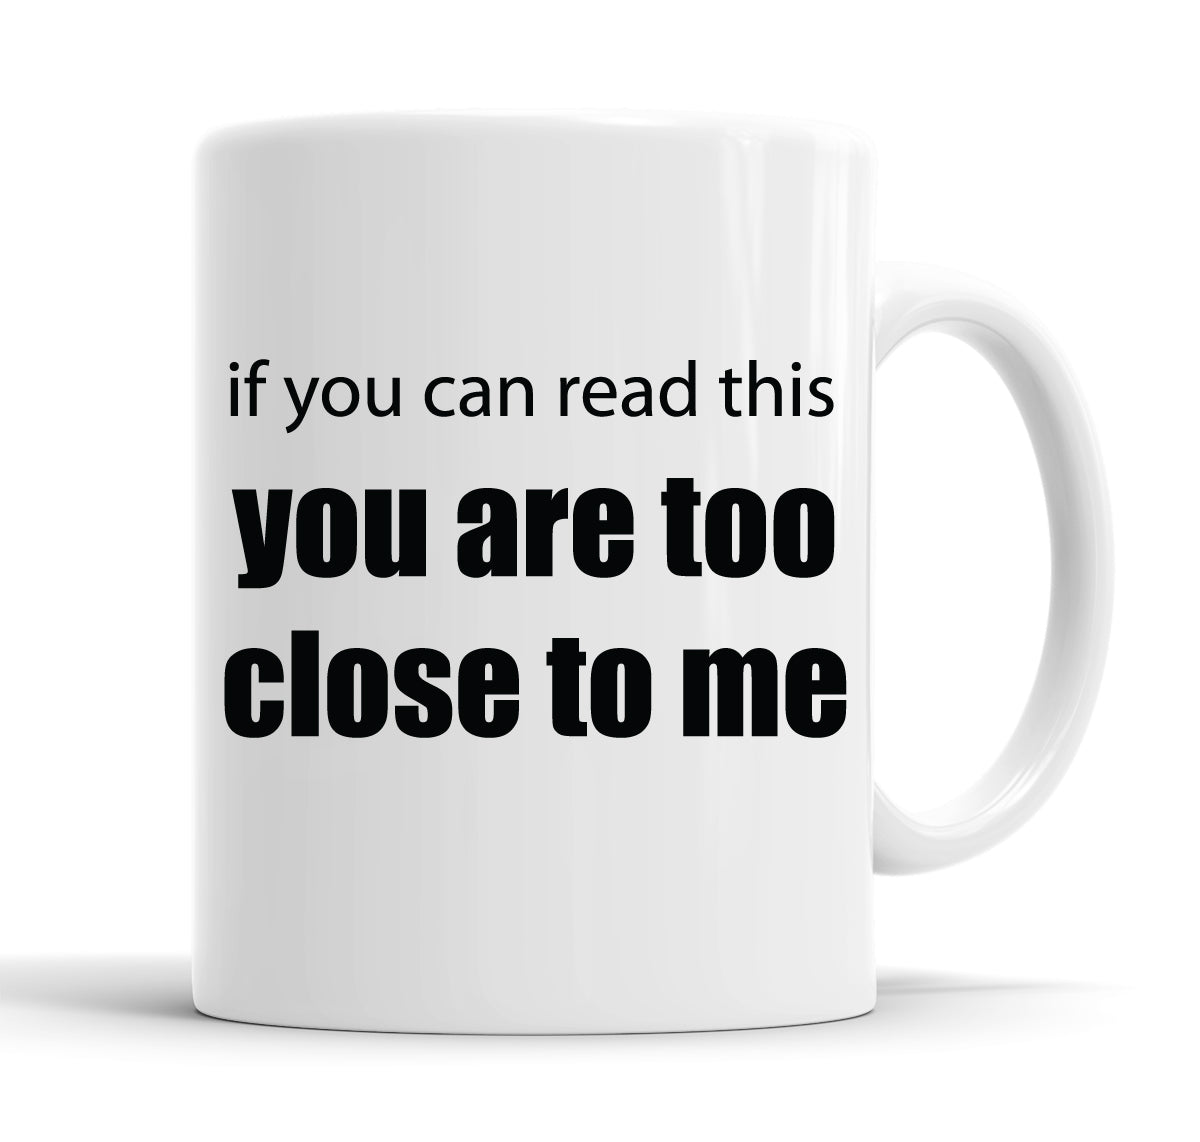 If You Can Read This You Are Too Close To Me Funny Slogan Mug Tea Cup Coffee